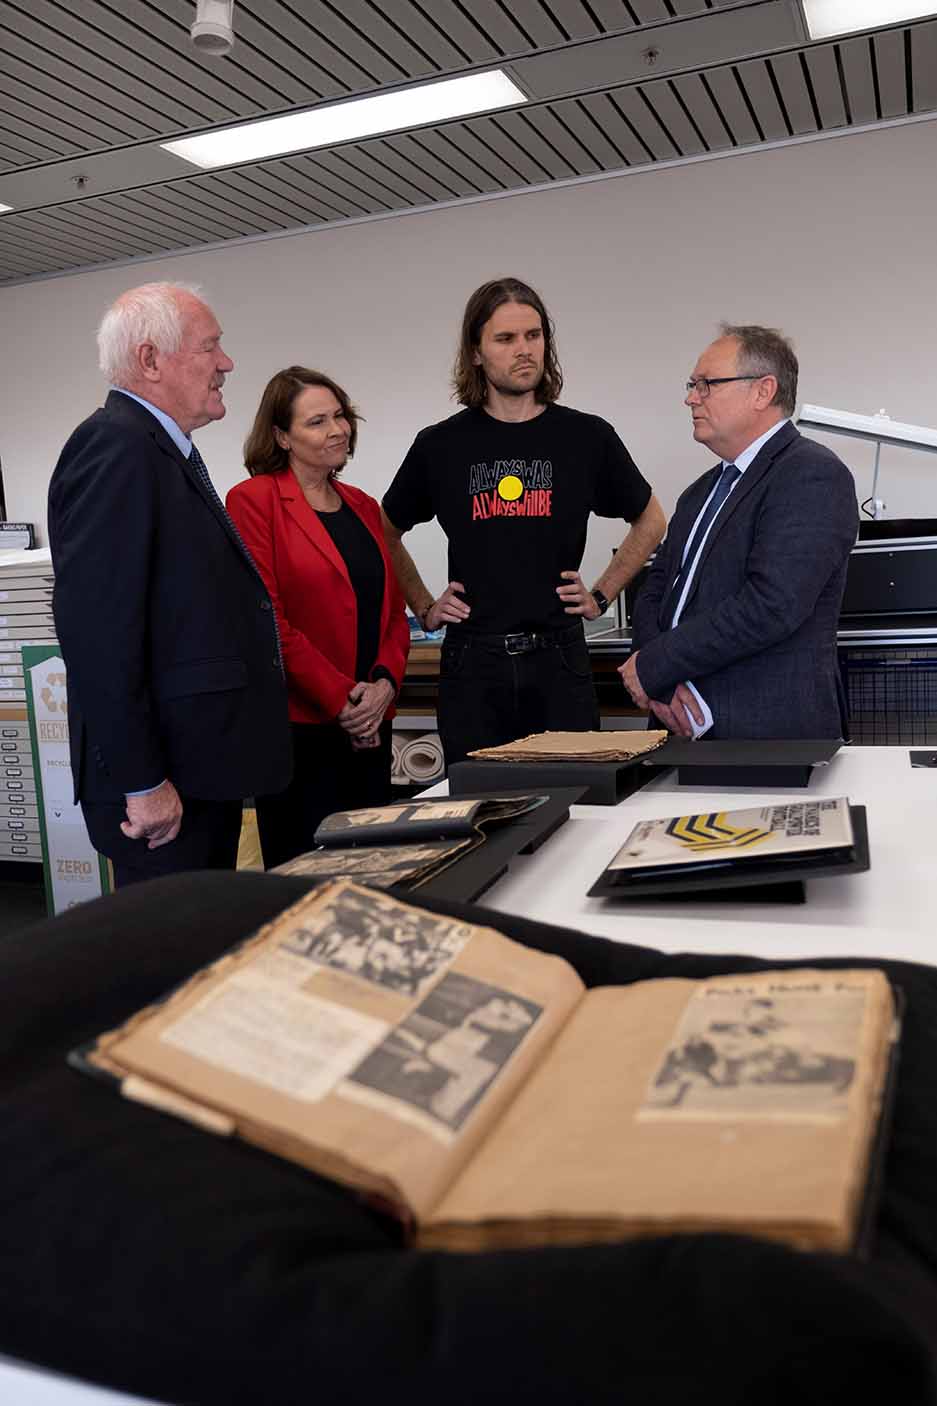 Graham Polly Farmer collection with Minister Murray, Minister Templeman and Farmer's daughter Kim and grandson Cole talking in front of items from the collection.